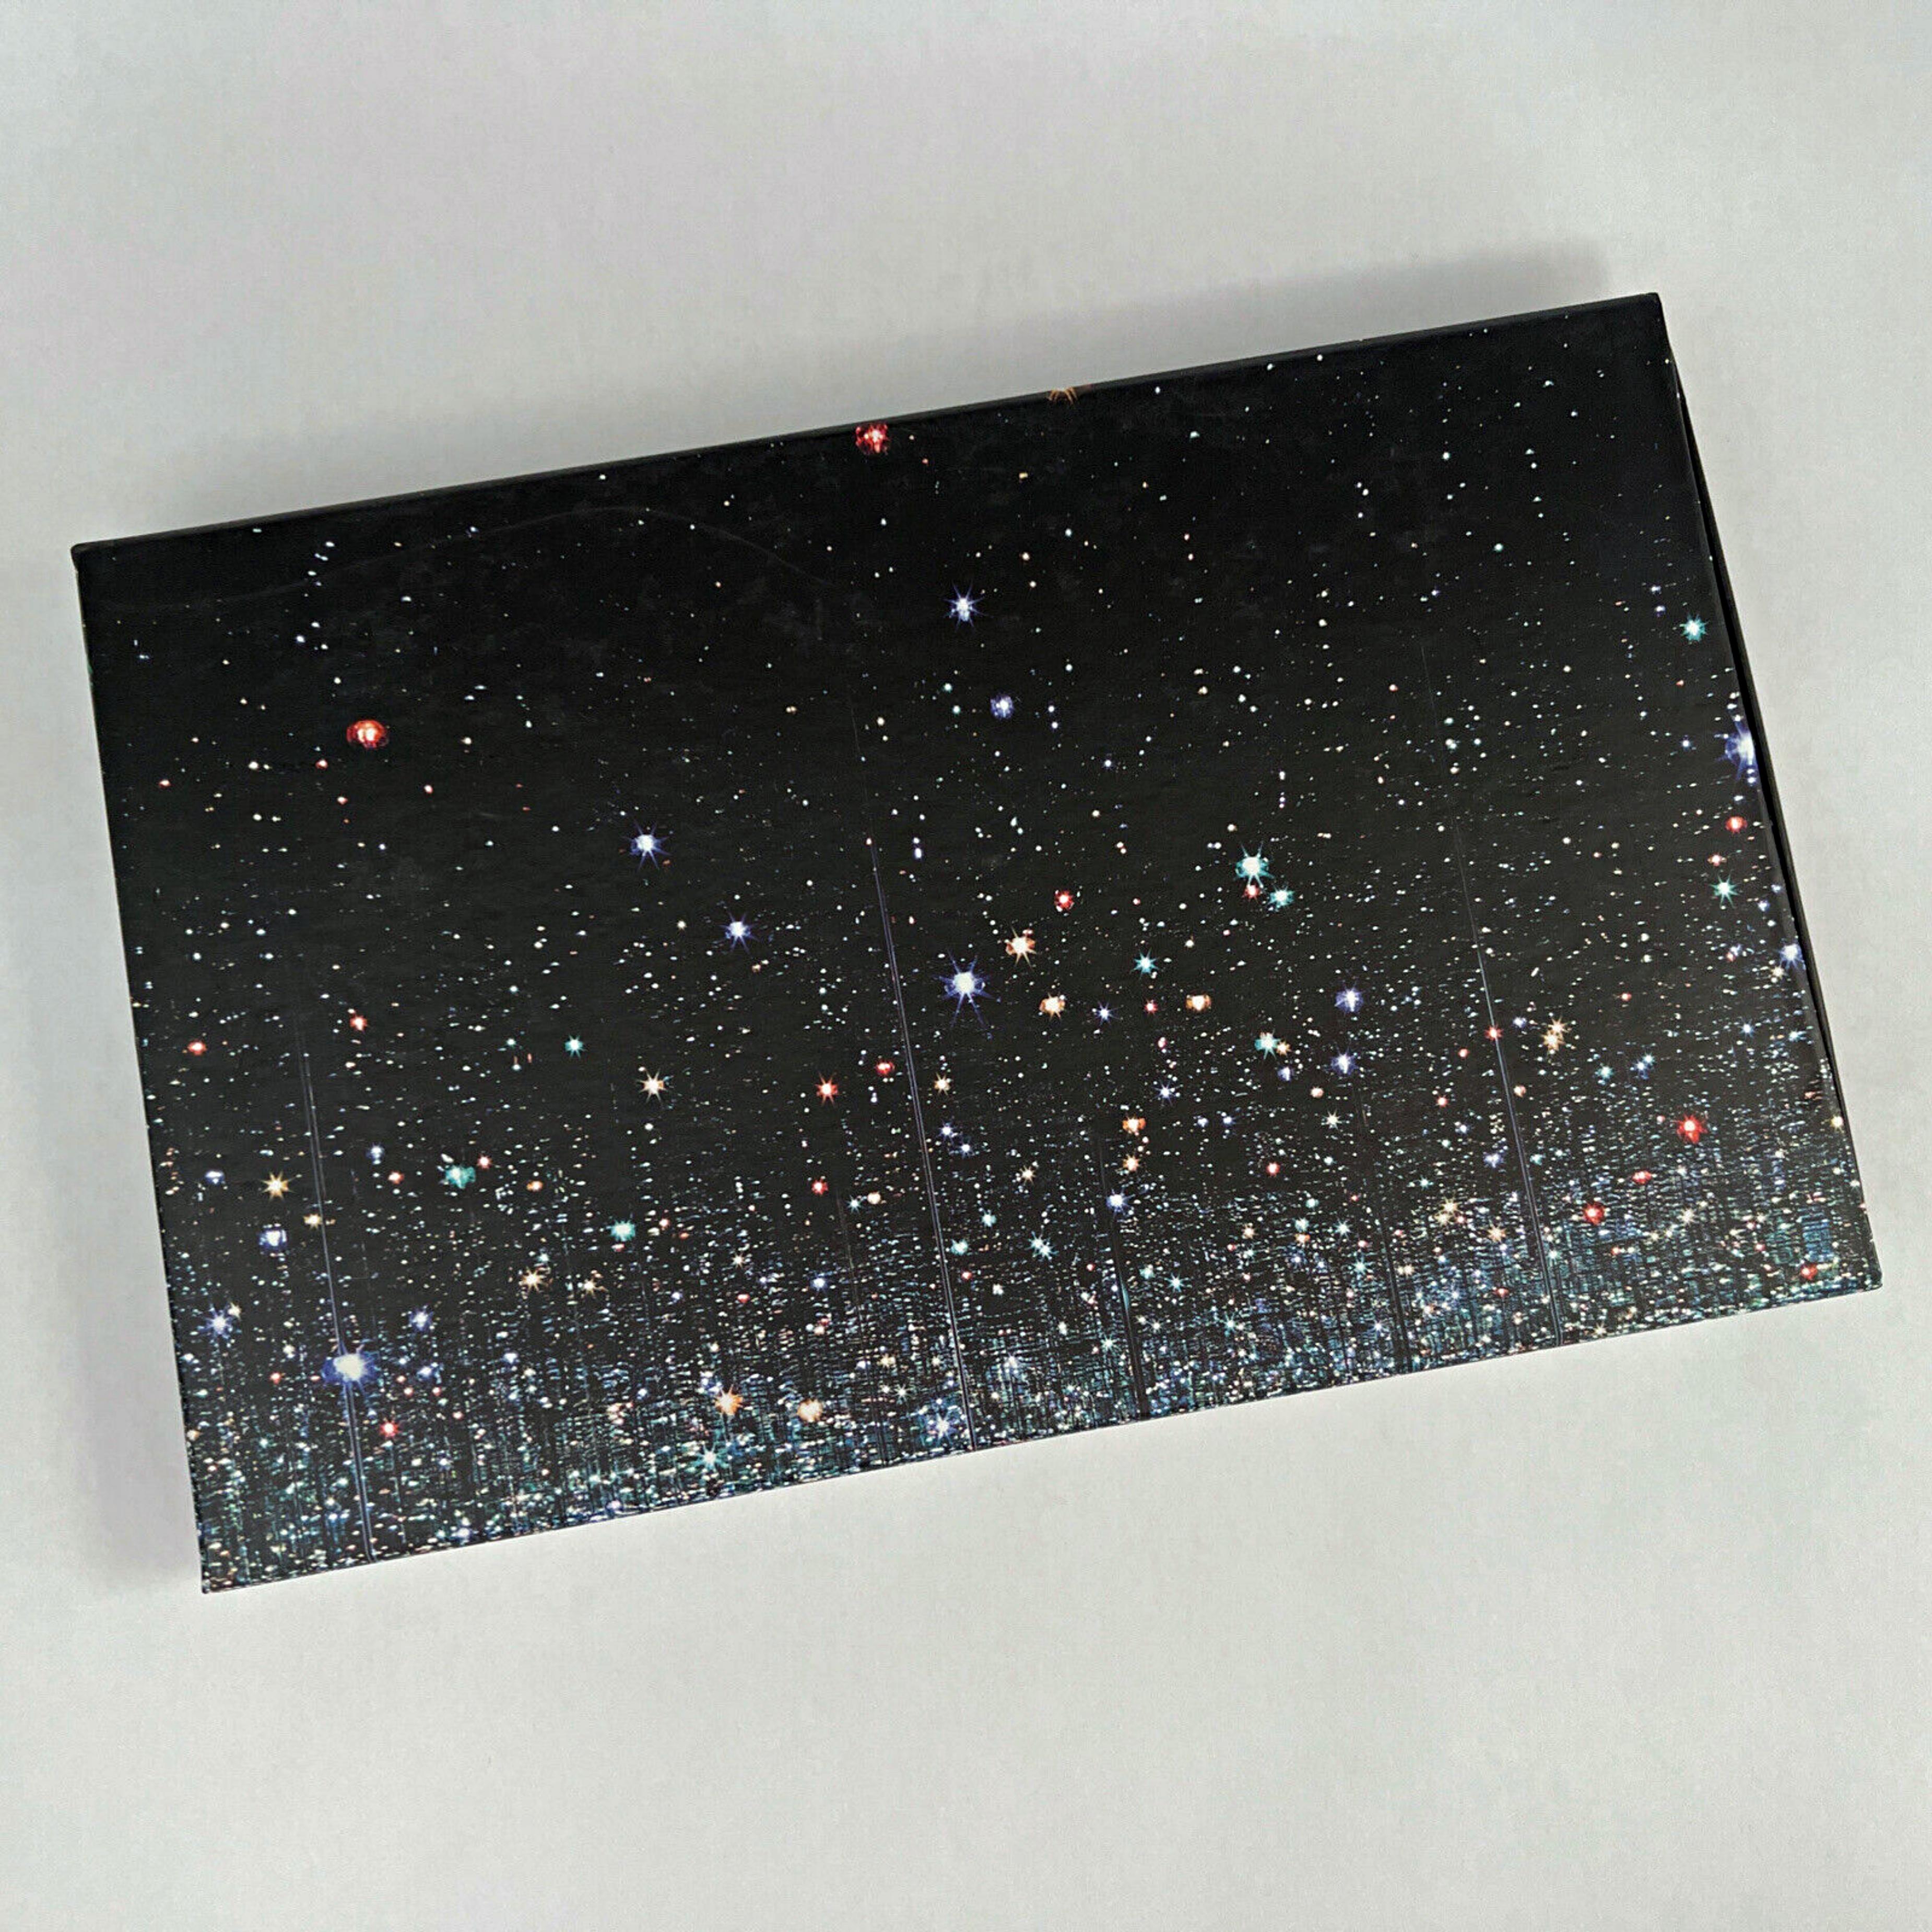 Limited Edition leather clutch (bag) depicting the famed Infinity Mirrored Room - Pop Art Art by Yayoi Kusama